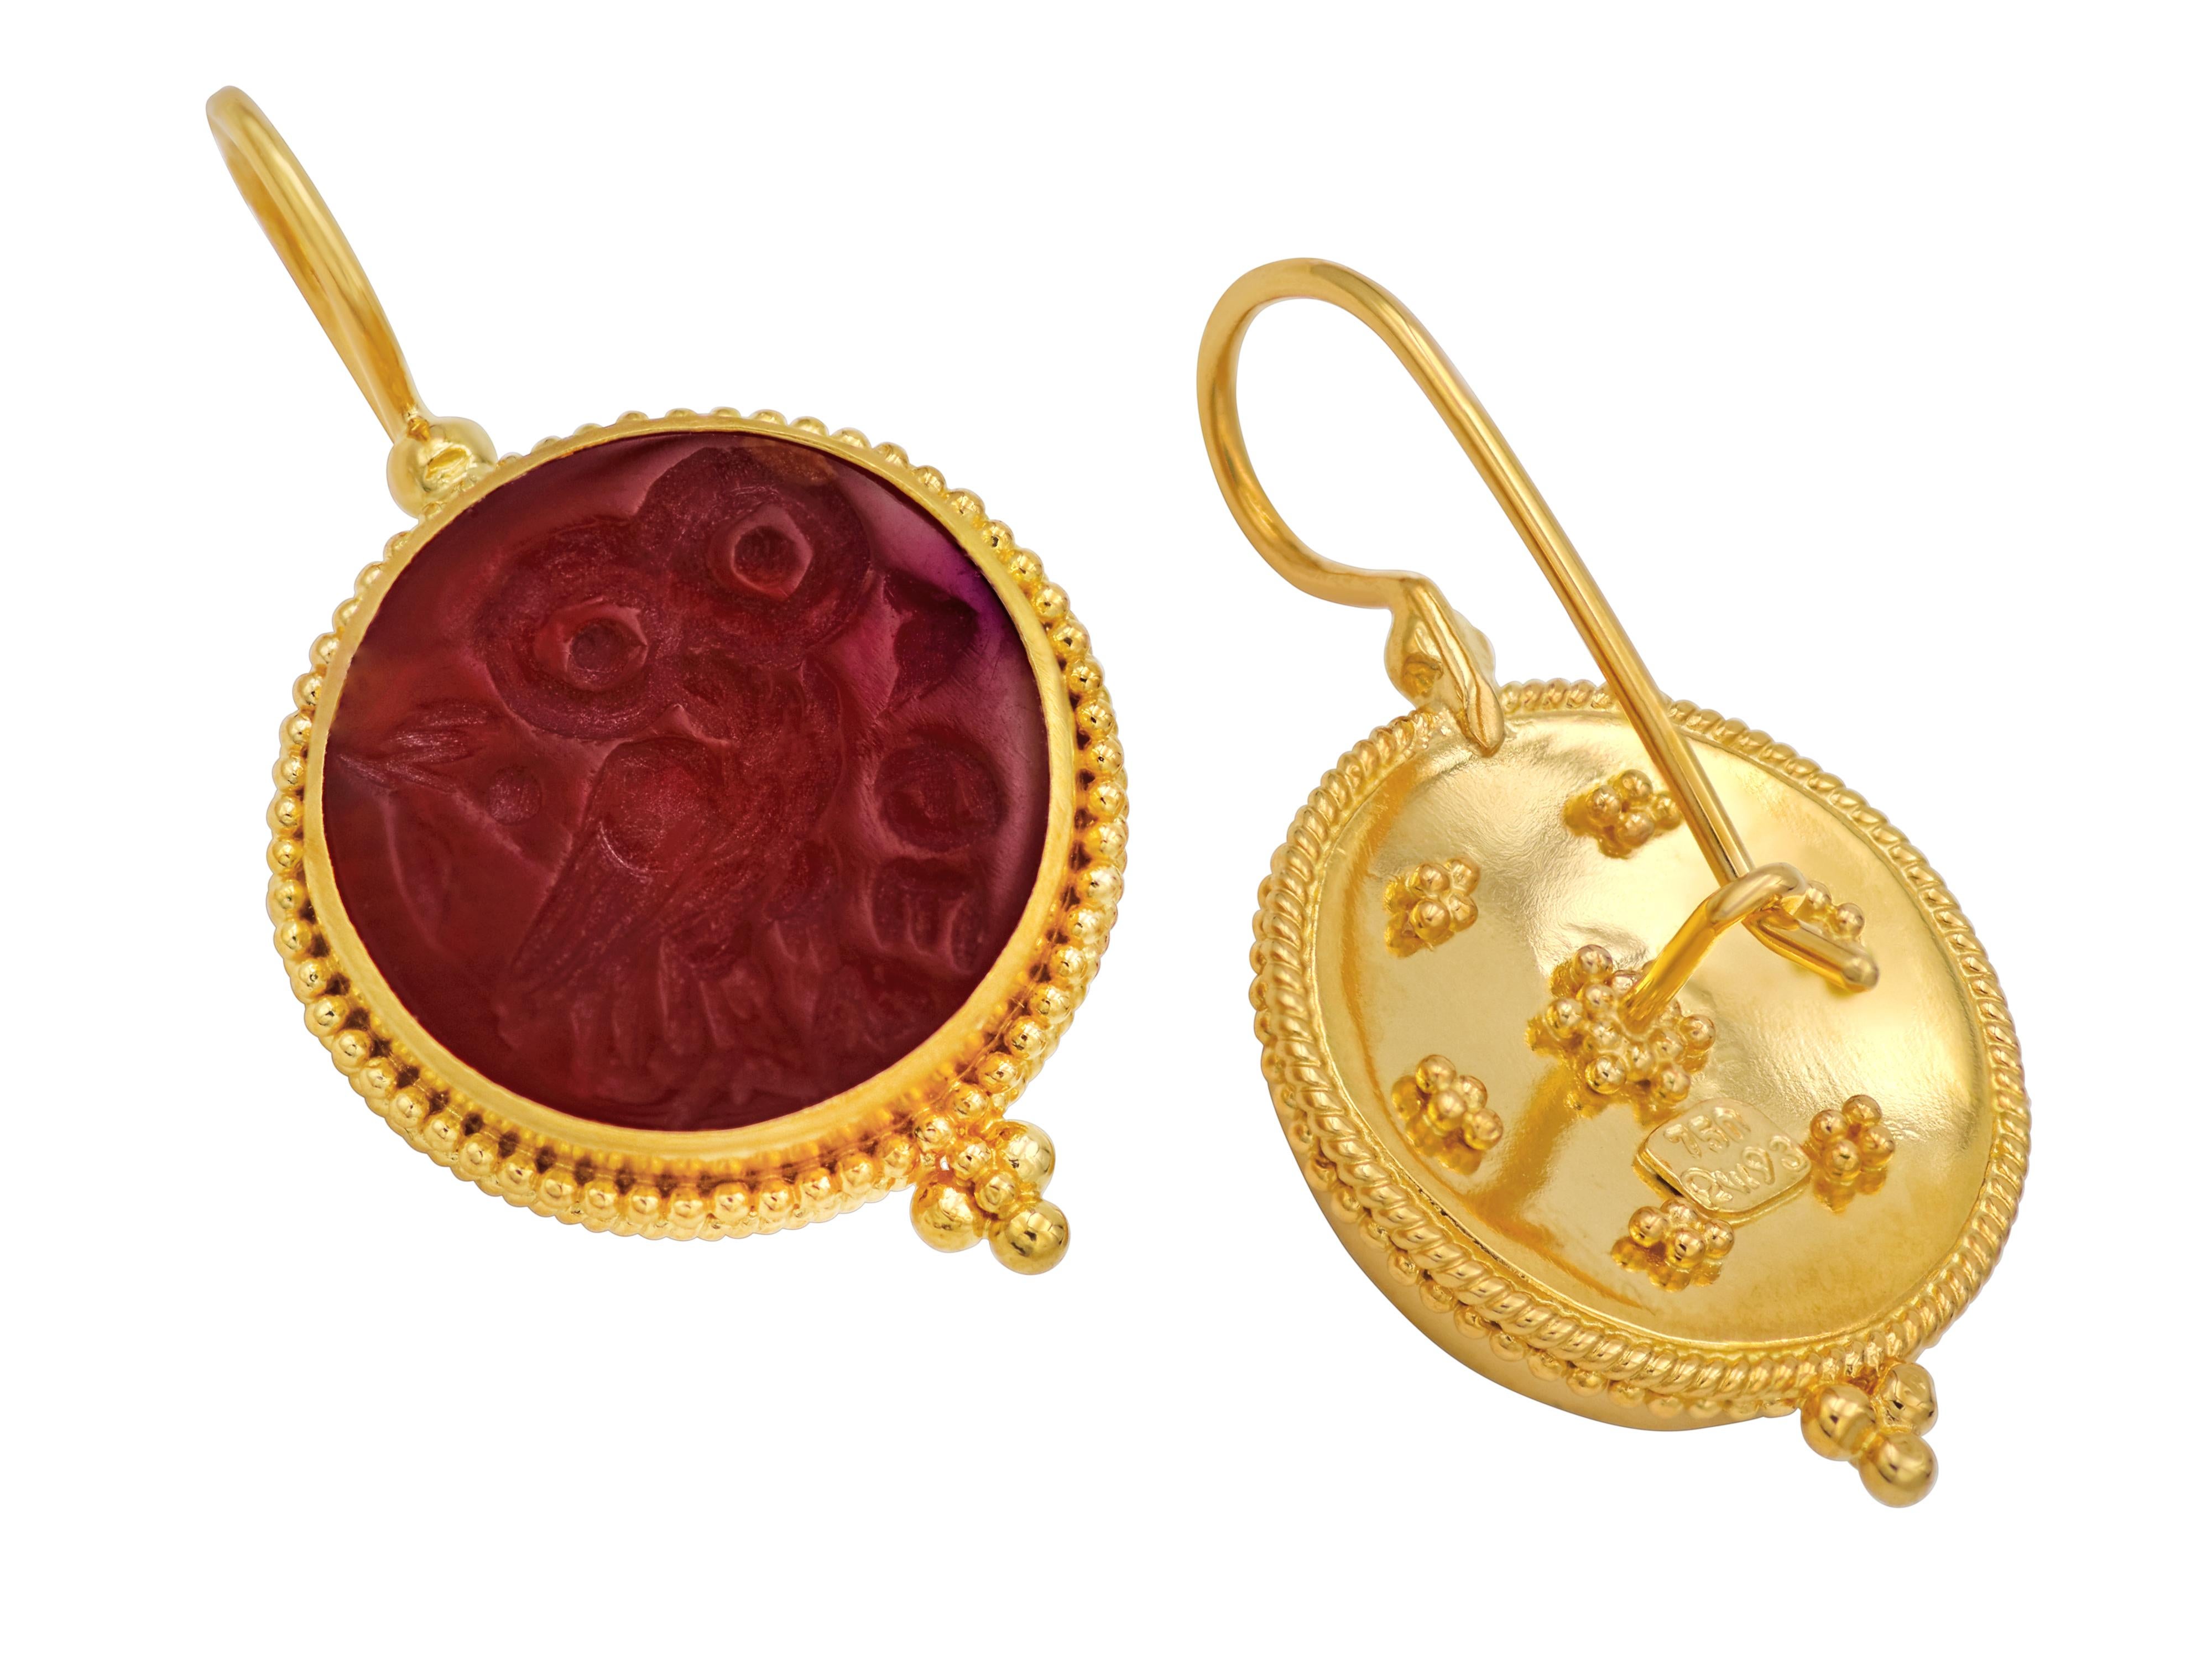 Classic earrings in 18k yellow gold with a natural cornelian stone made in museum replica and decorated with granulations even in the back. The cornelian is hand carved showing the owl symbol of wisdom and symbol of Athens.